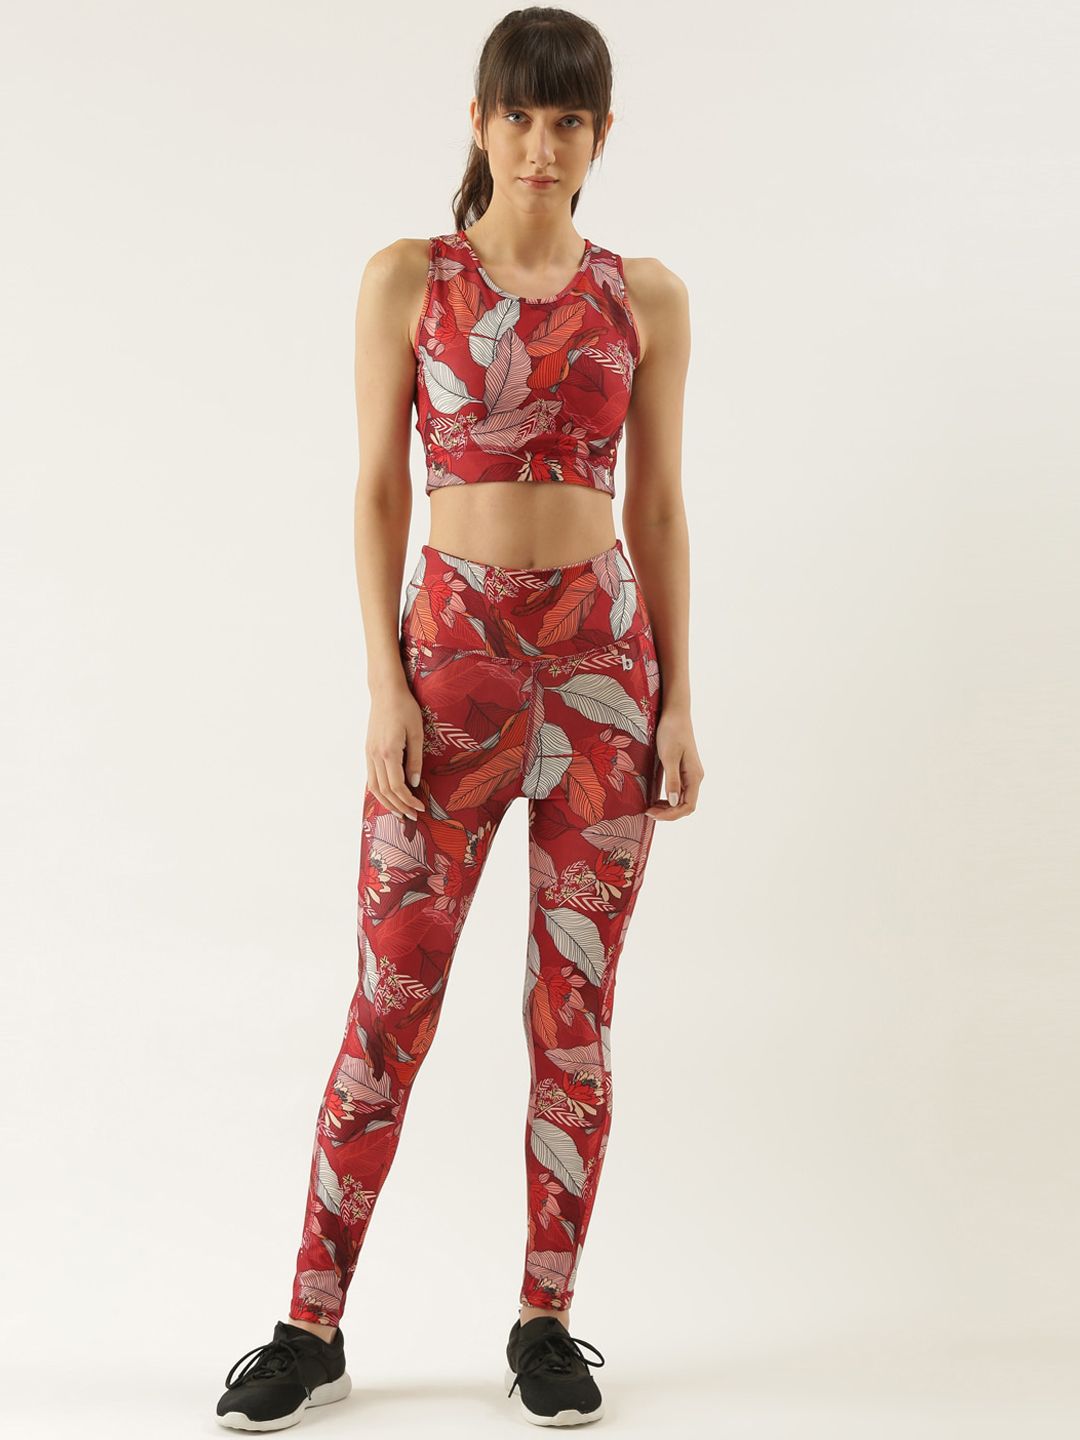 Bannos Swagger Women Red & White Tropical Printed Sport Bra & Tights Set Price in India